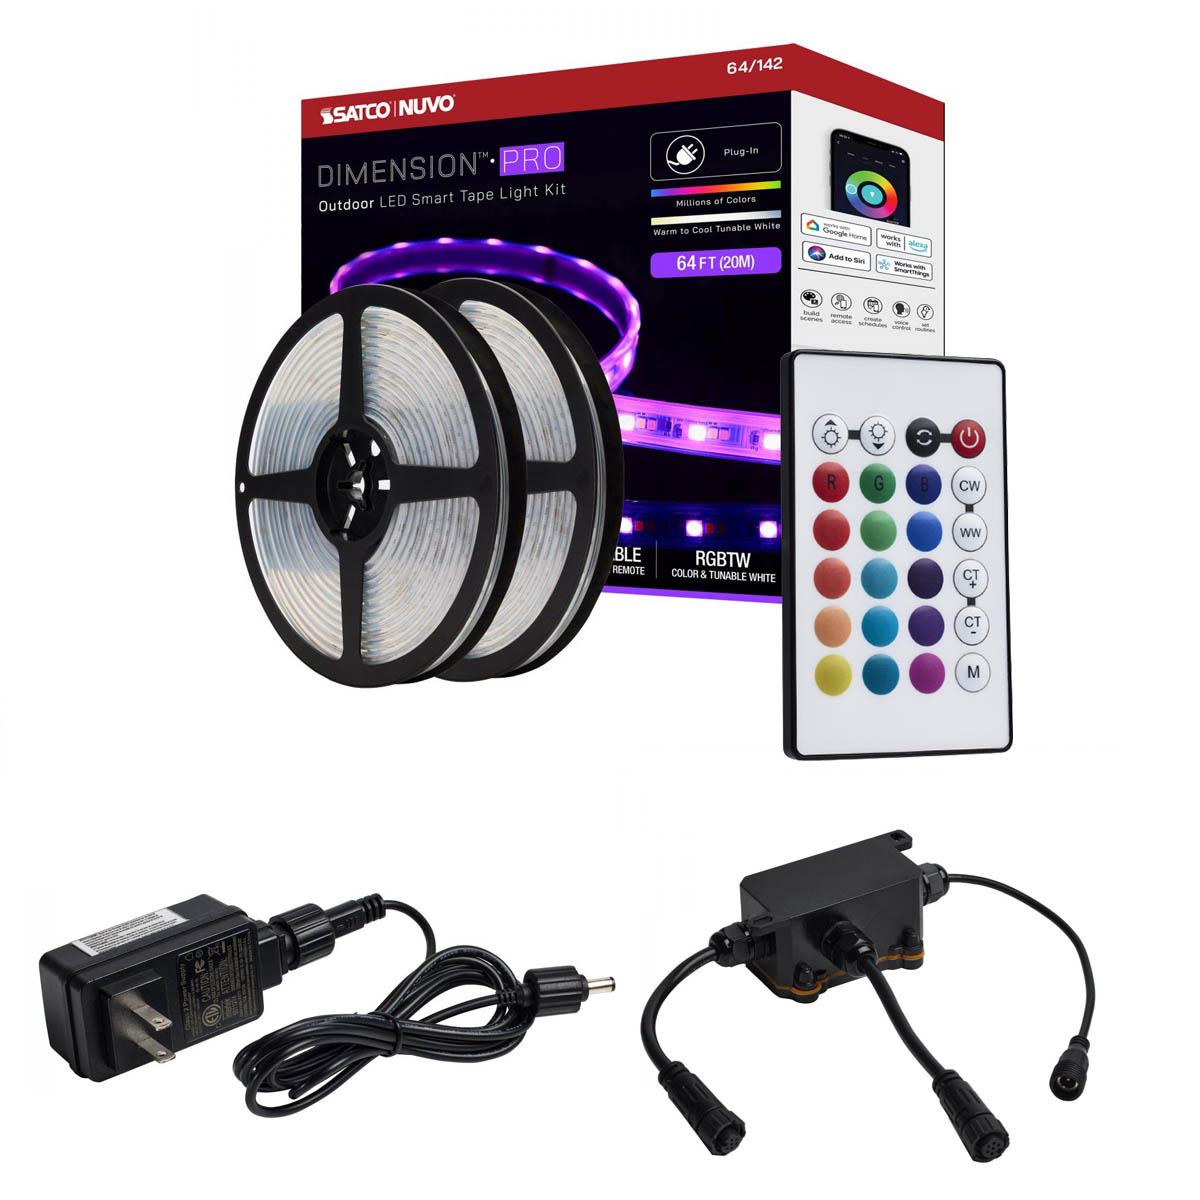 Dimension Pro Outdoor Smart LED Tape Light Kit with Remote, 65ft Reel, Color Changing RGB and Tunable White, 24V, Plug Connection